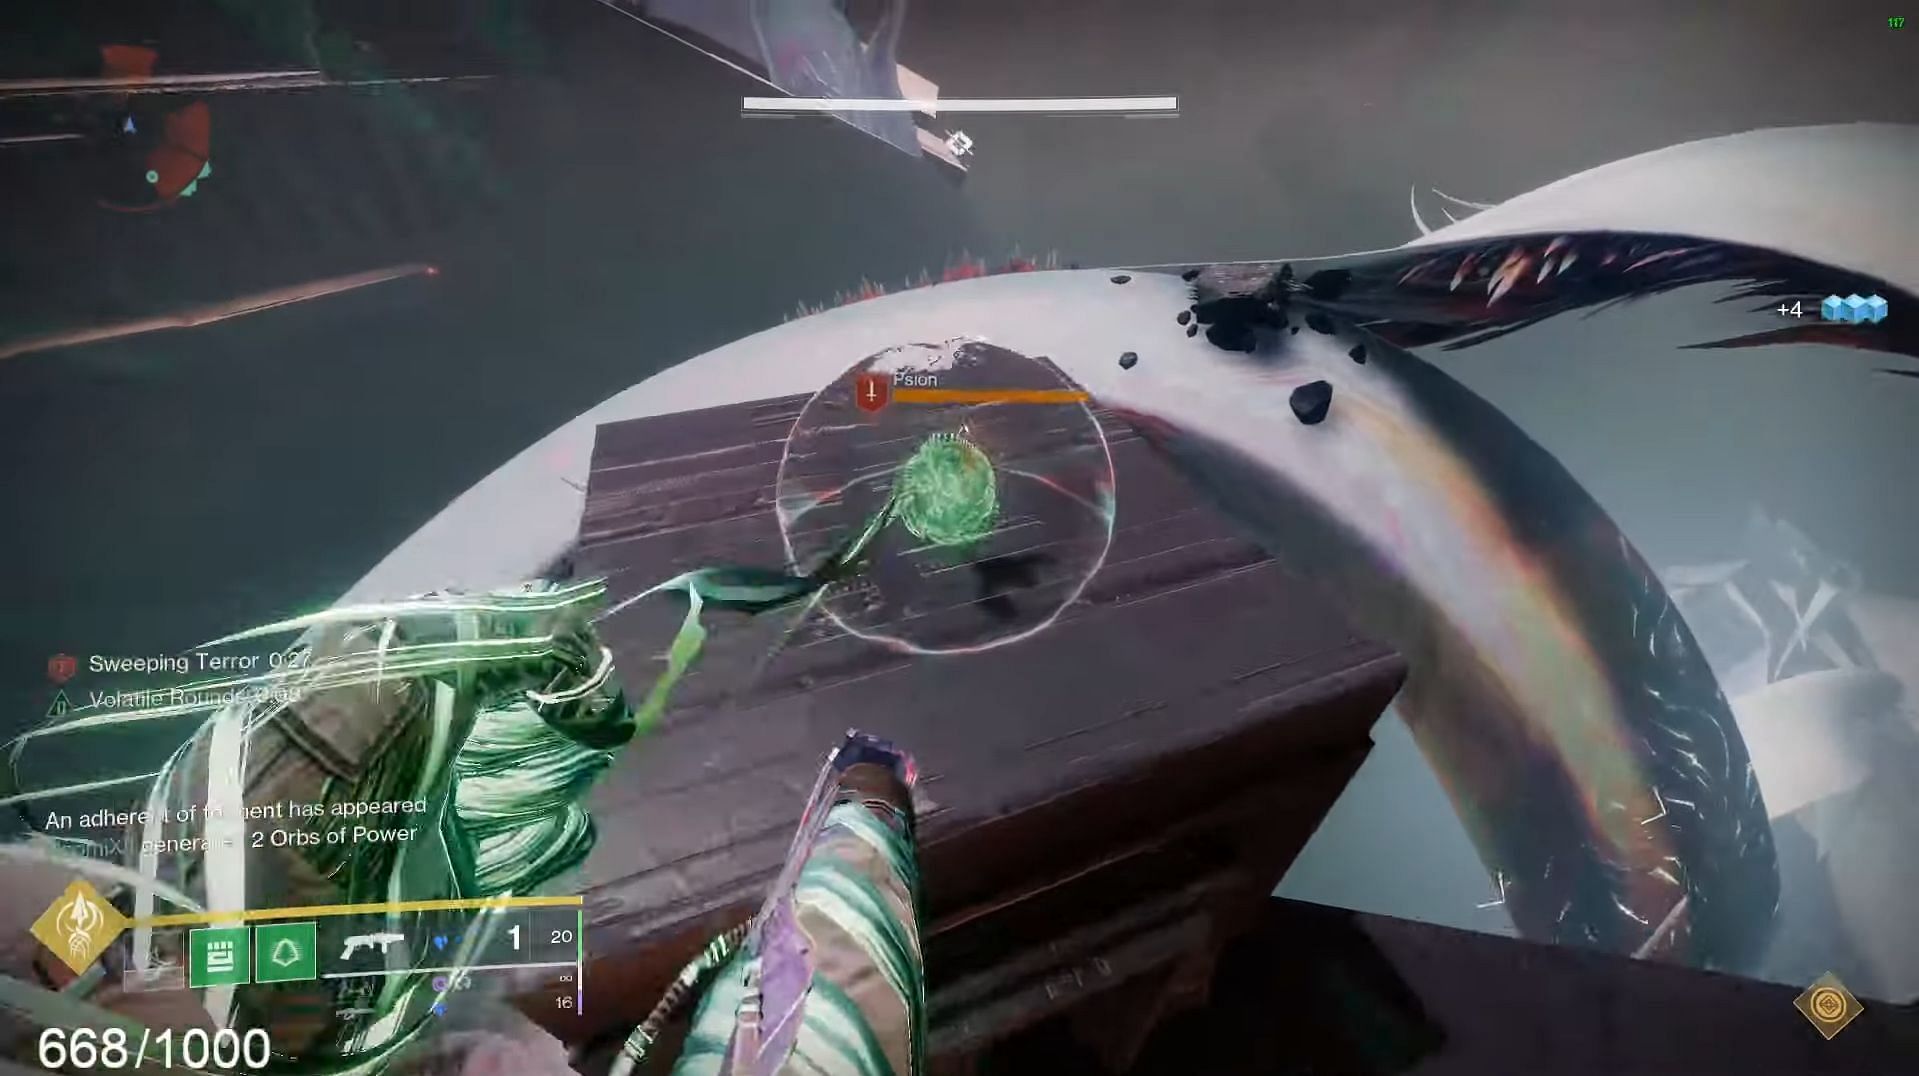 Destiny 2 Psion spawning within the Cataclysm arena (Image via SayWallahBruh)